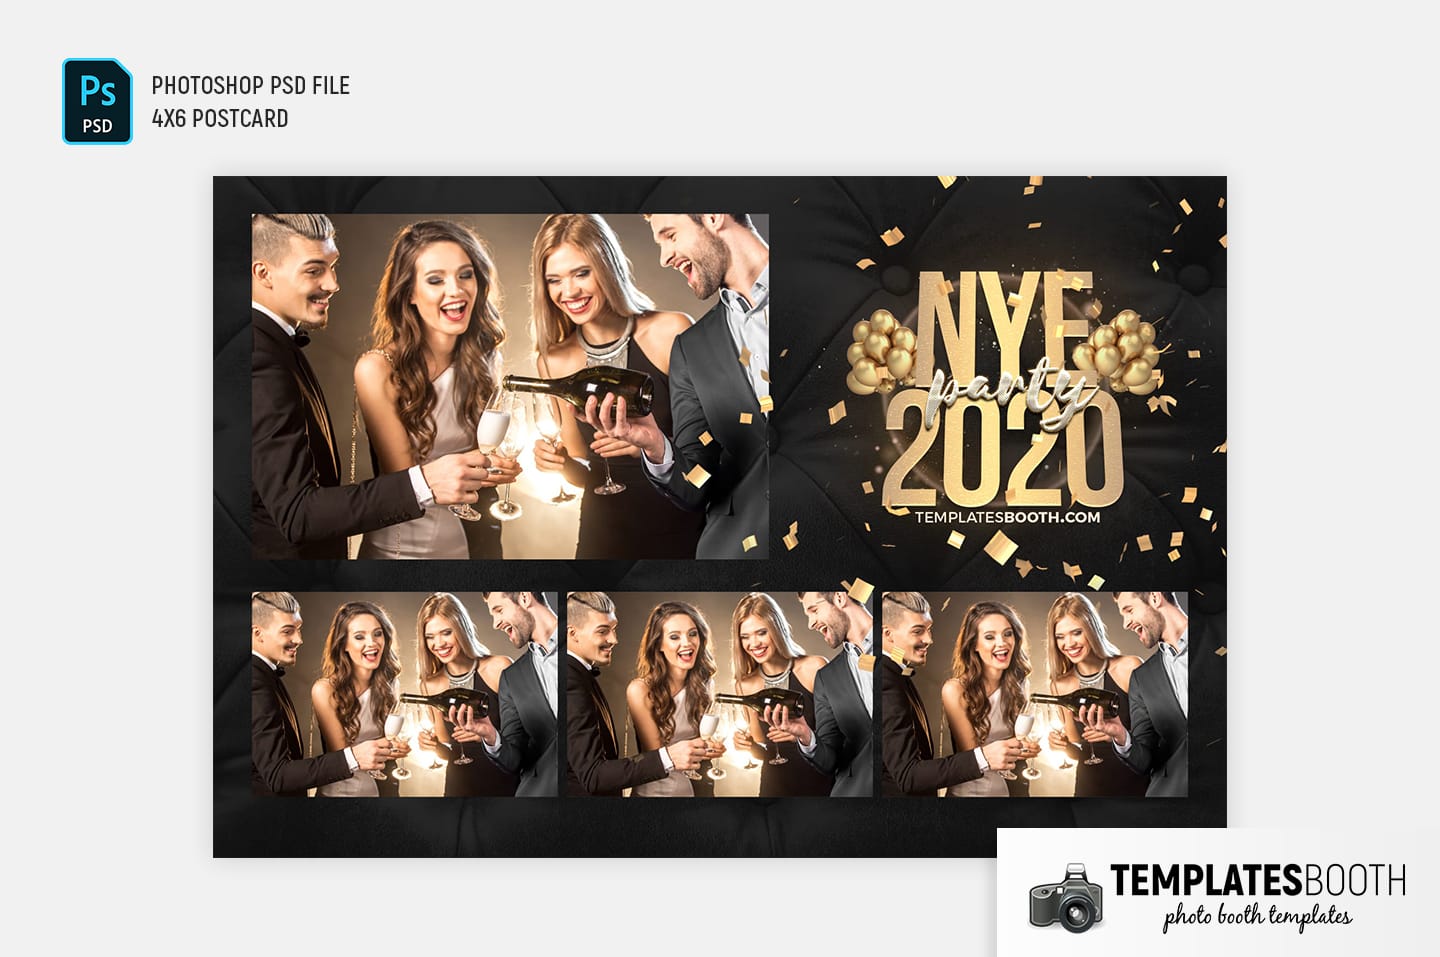 New Year's Eve Photo Booth Template (4x6 postcard)